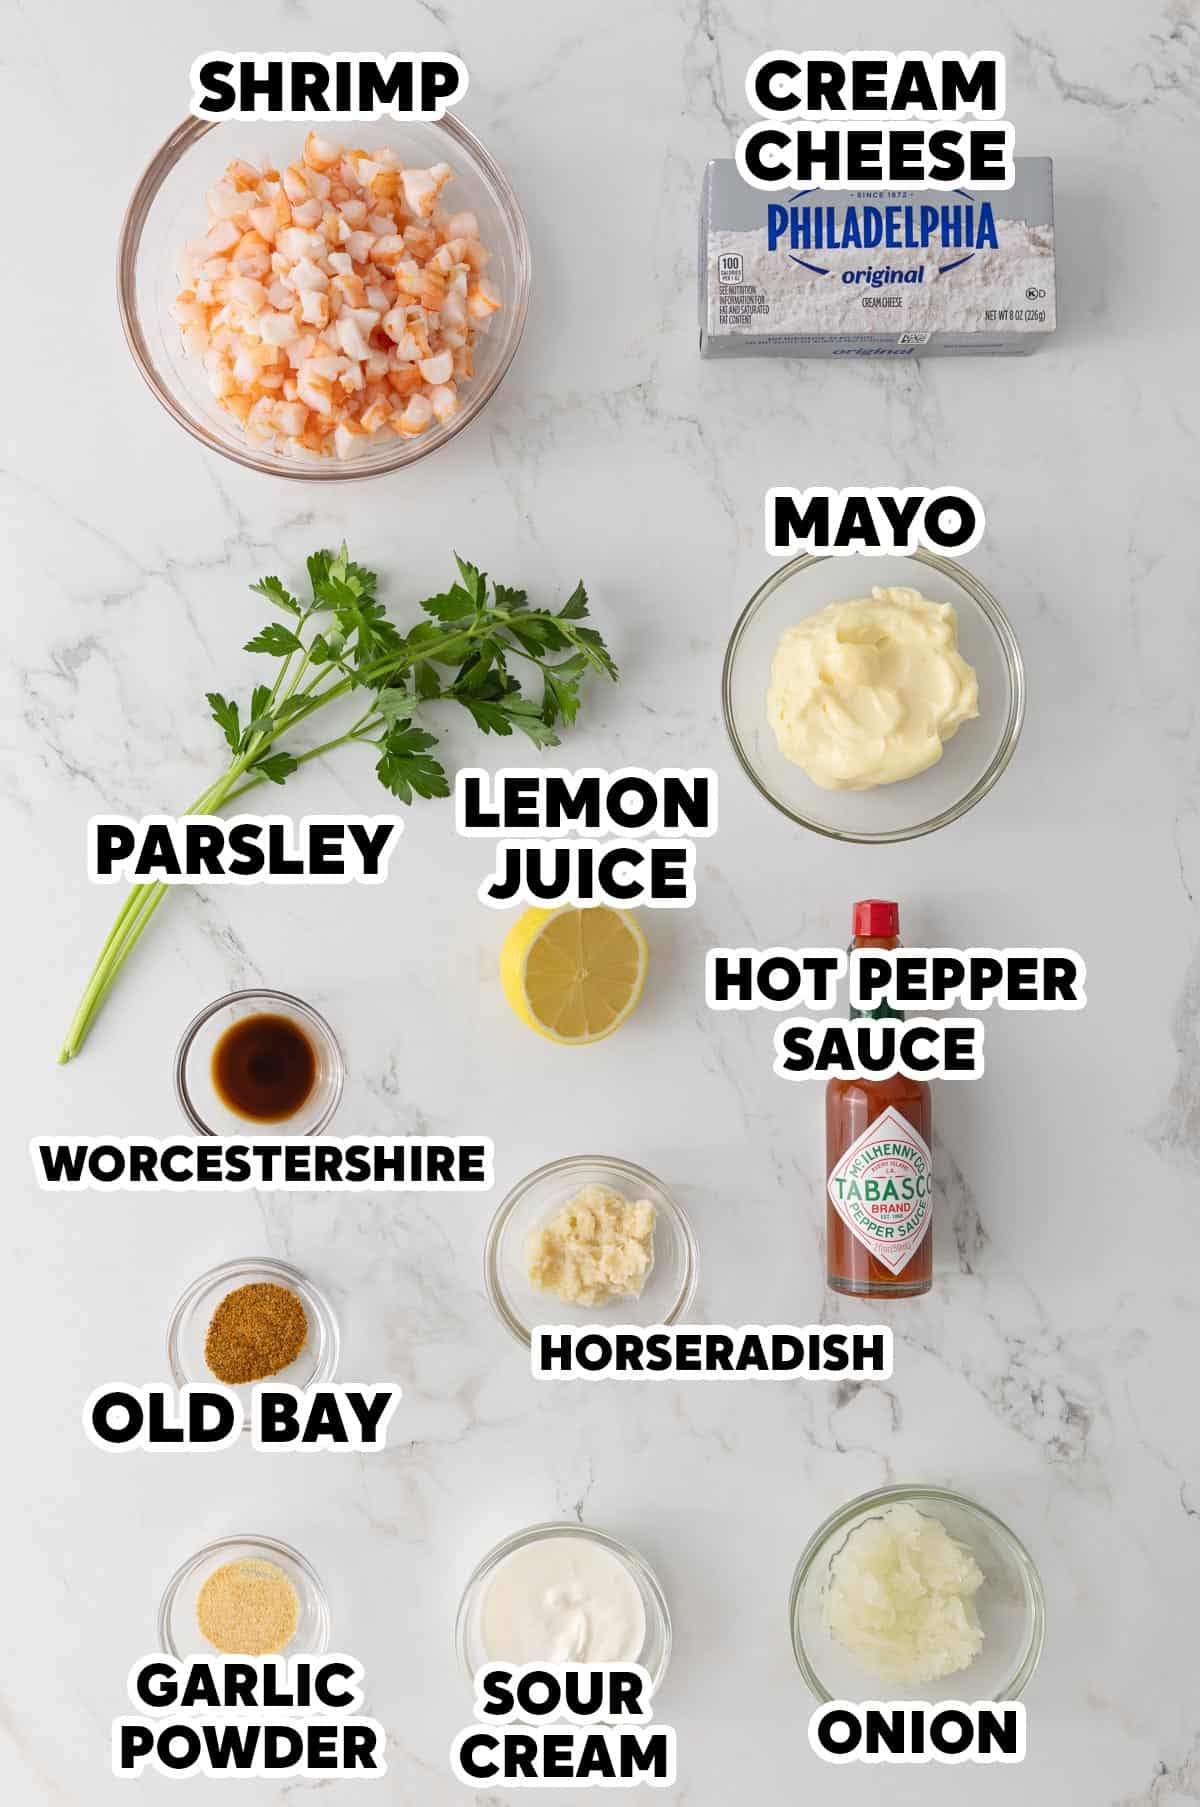 Overhead view of ingredients for making shrimp dip with overlay text.